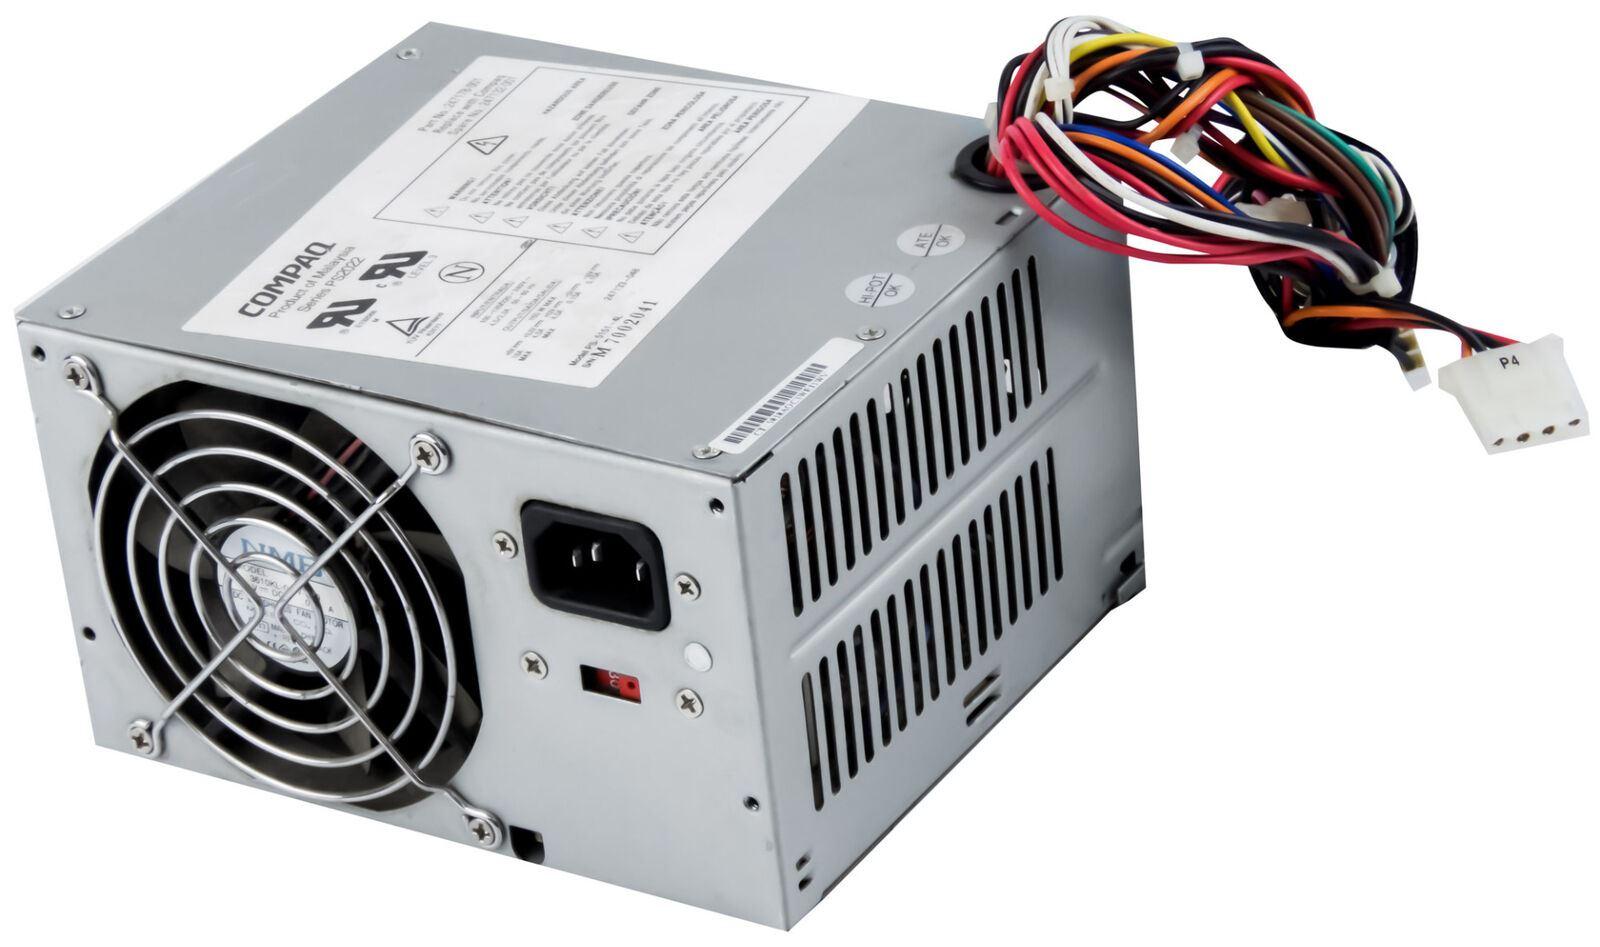 247178 001 PS2022 247132 001 switching power supply 110 240vac input 45 66hz 4 dc outputs 160 watts no longer supplied